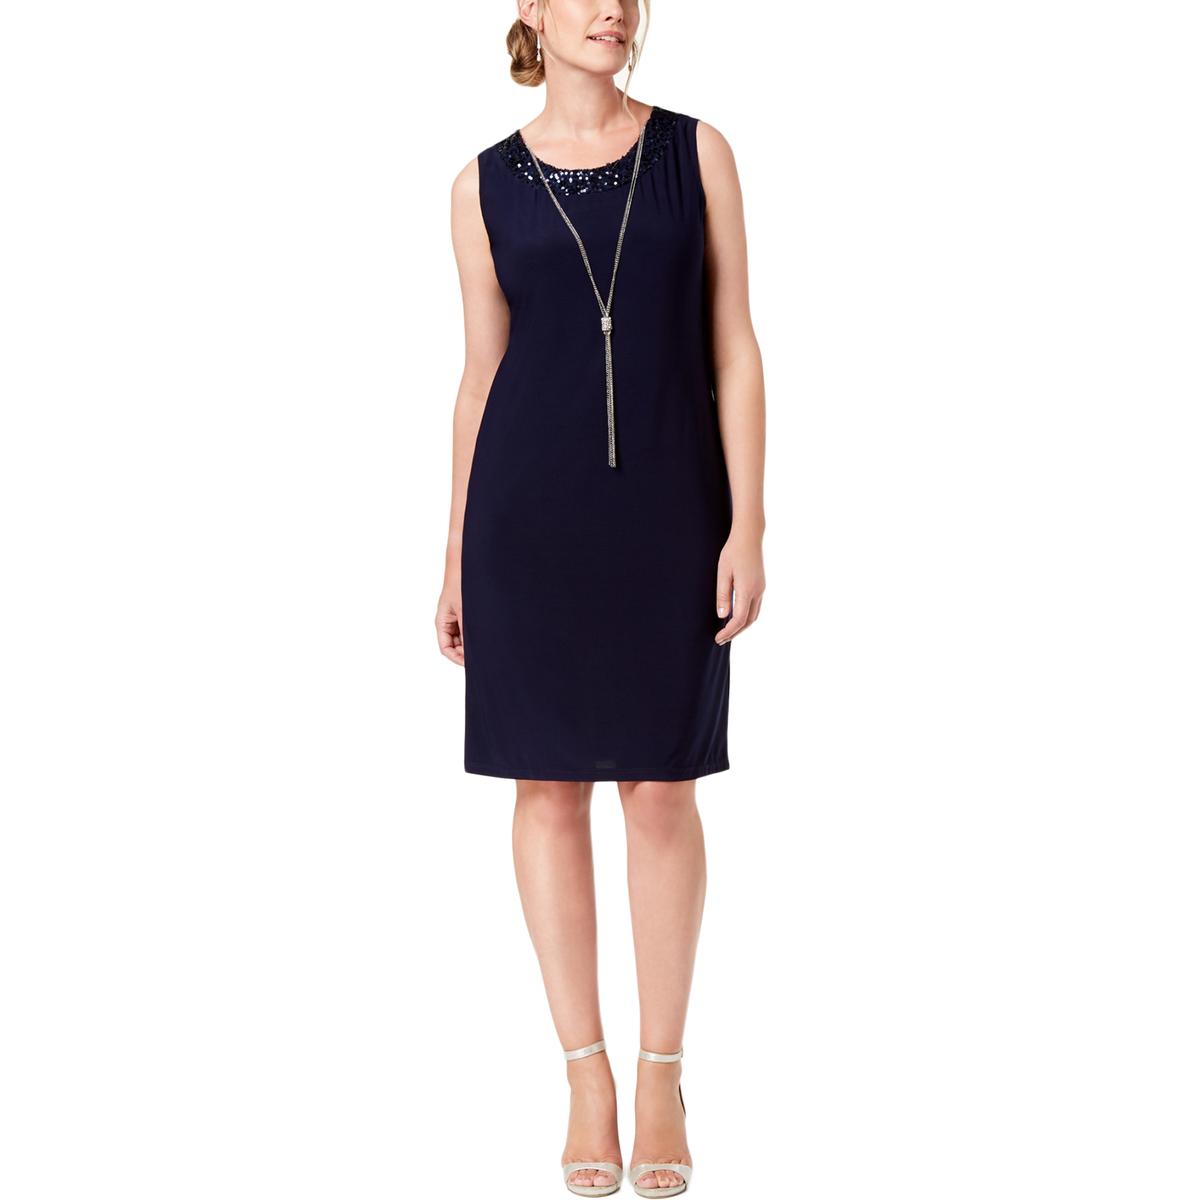 R&M Richards Womens Navy Metallic Sequined 2PC Dress With Jacket 8 BHFO